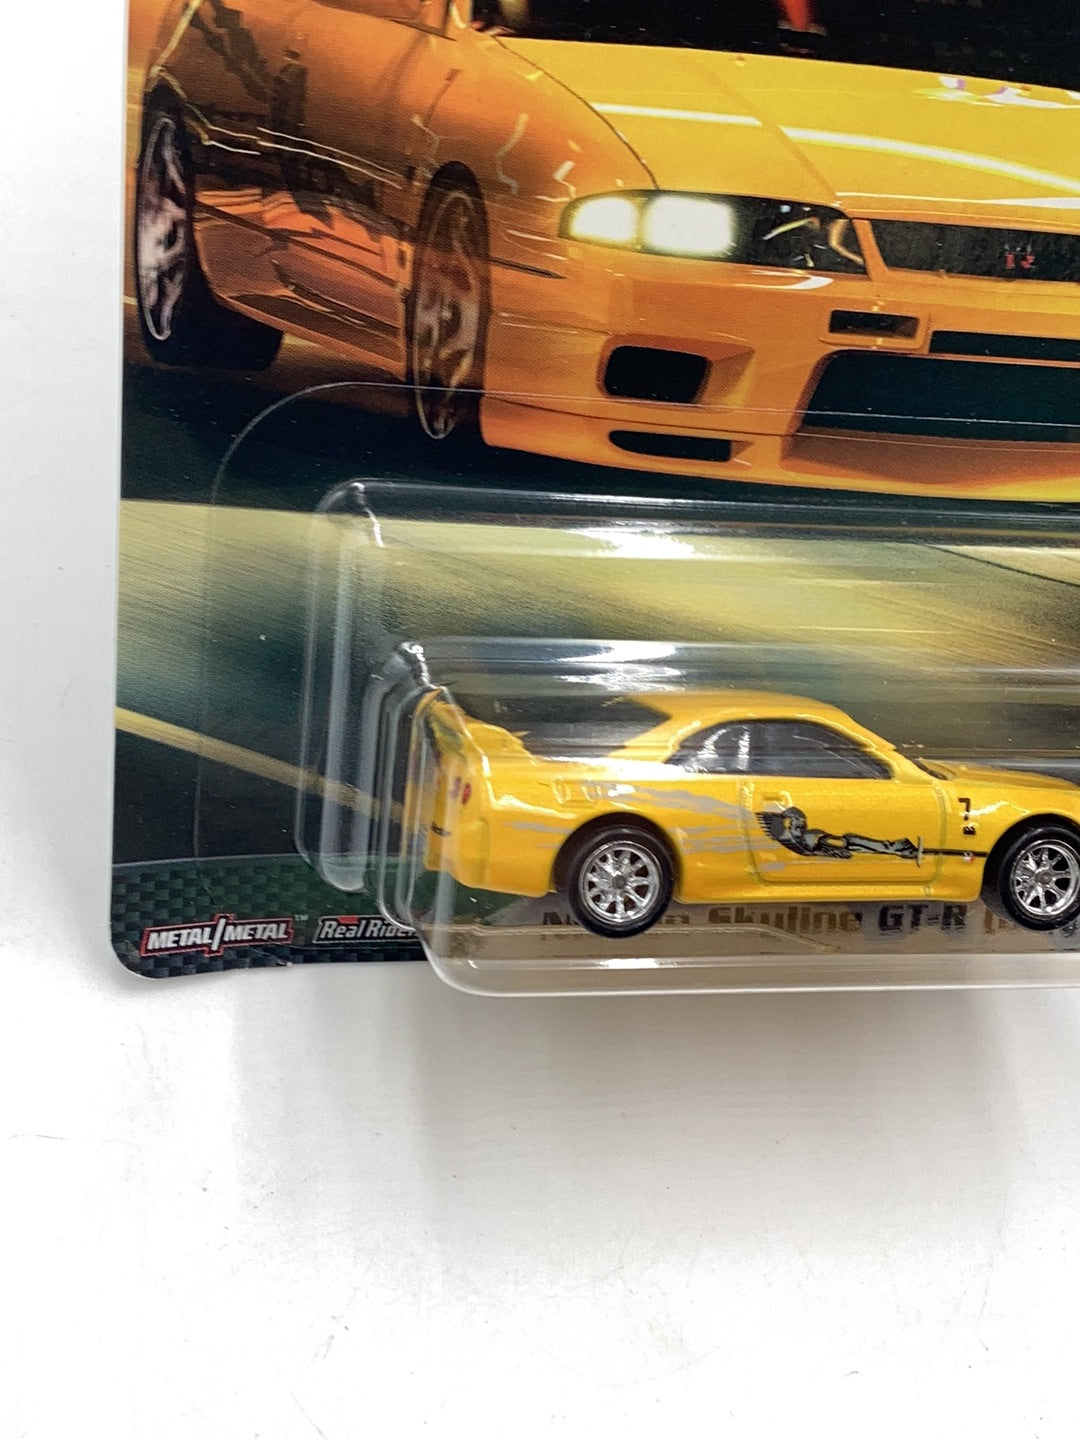 Hot wheels premium fast and furious Original Fast Nissan skyline GT-R bcnr33 5/5 with protector